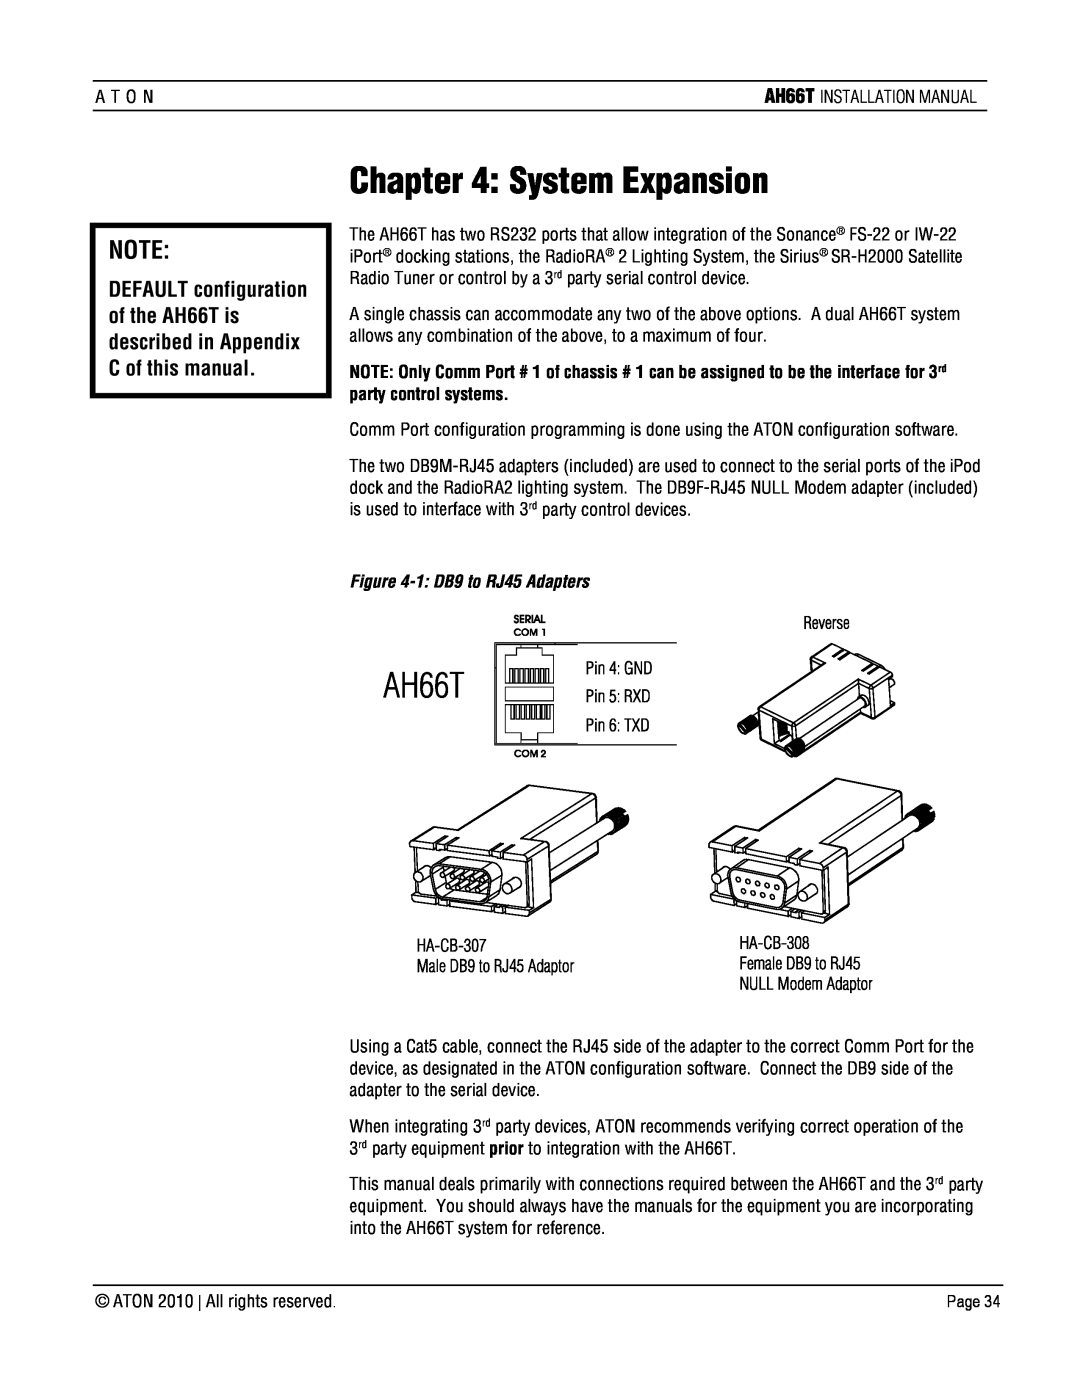 ATON AH66T-KT installation manual System Expansion, 1 DB9 to RJ45 Adapters 